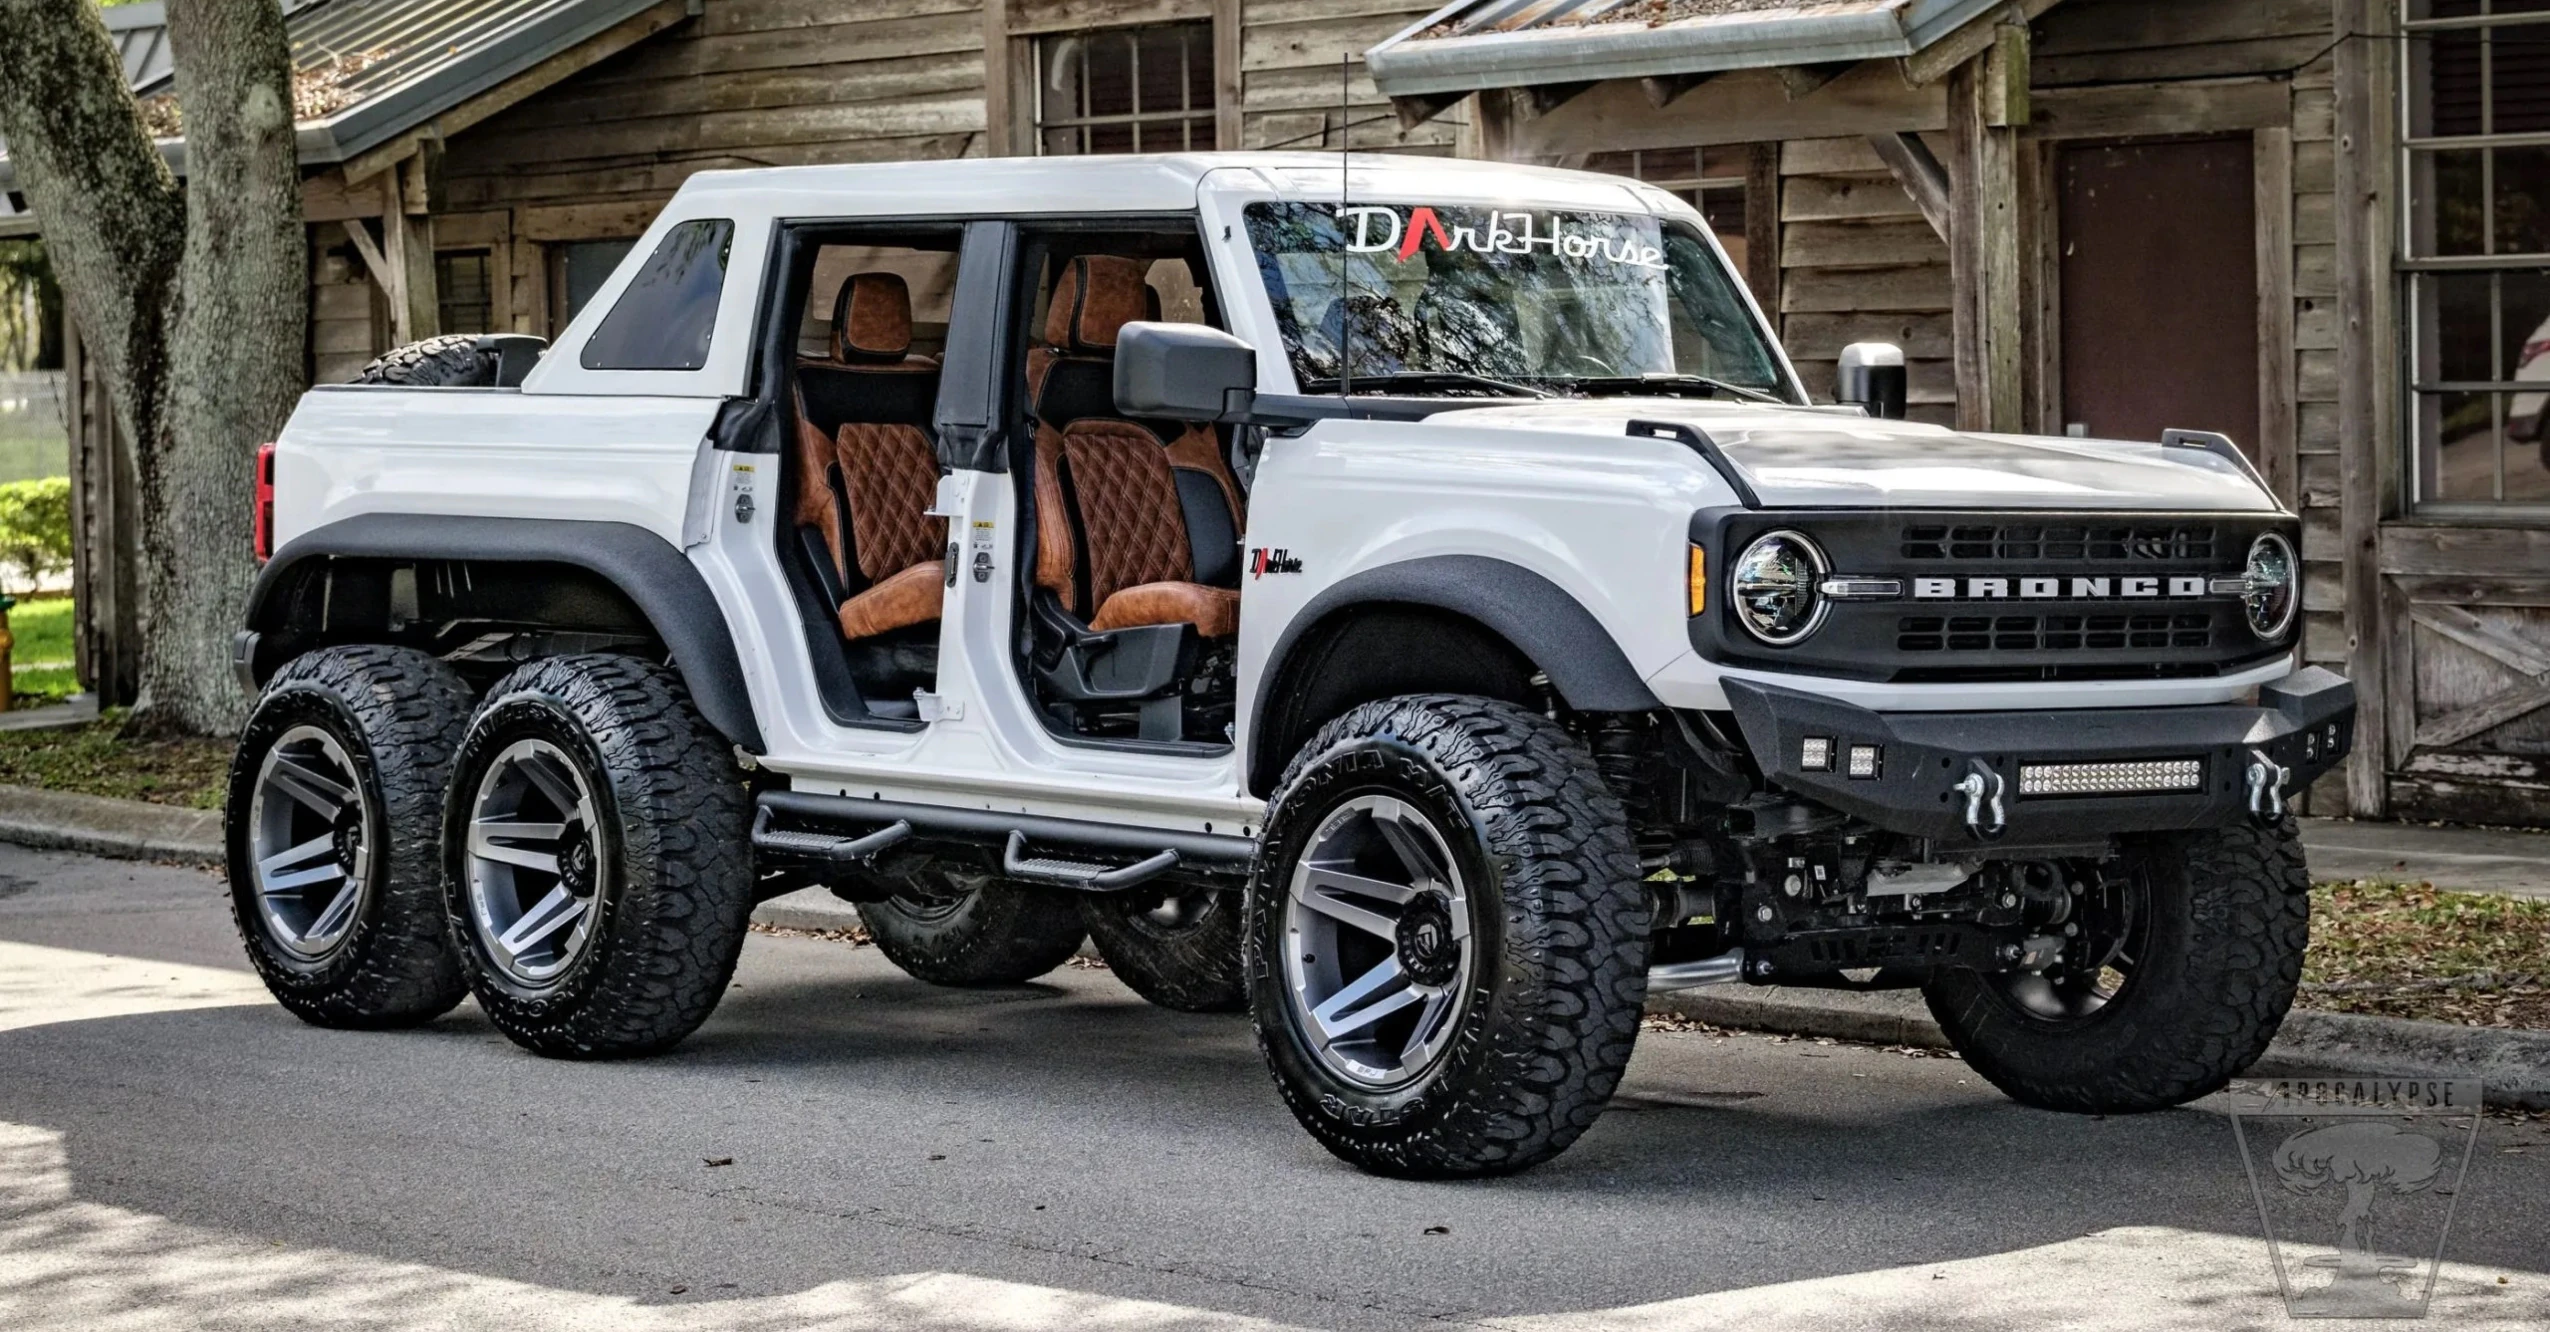 The World’s First Ford Bronco 6×6 Can Now Be Yours